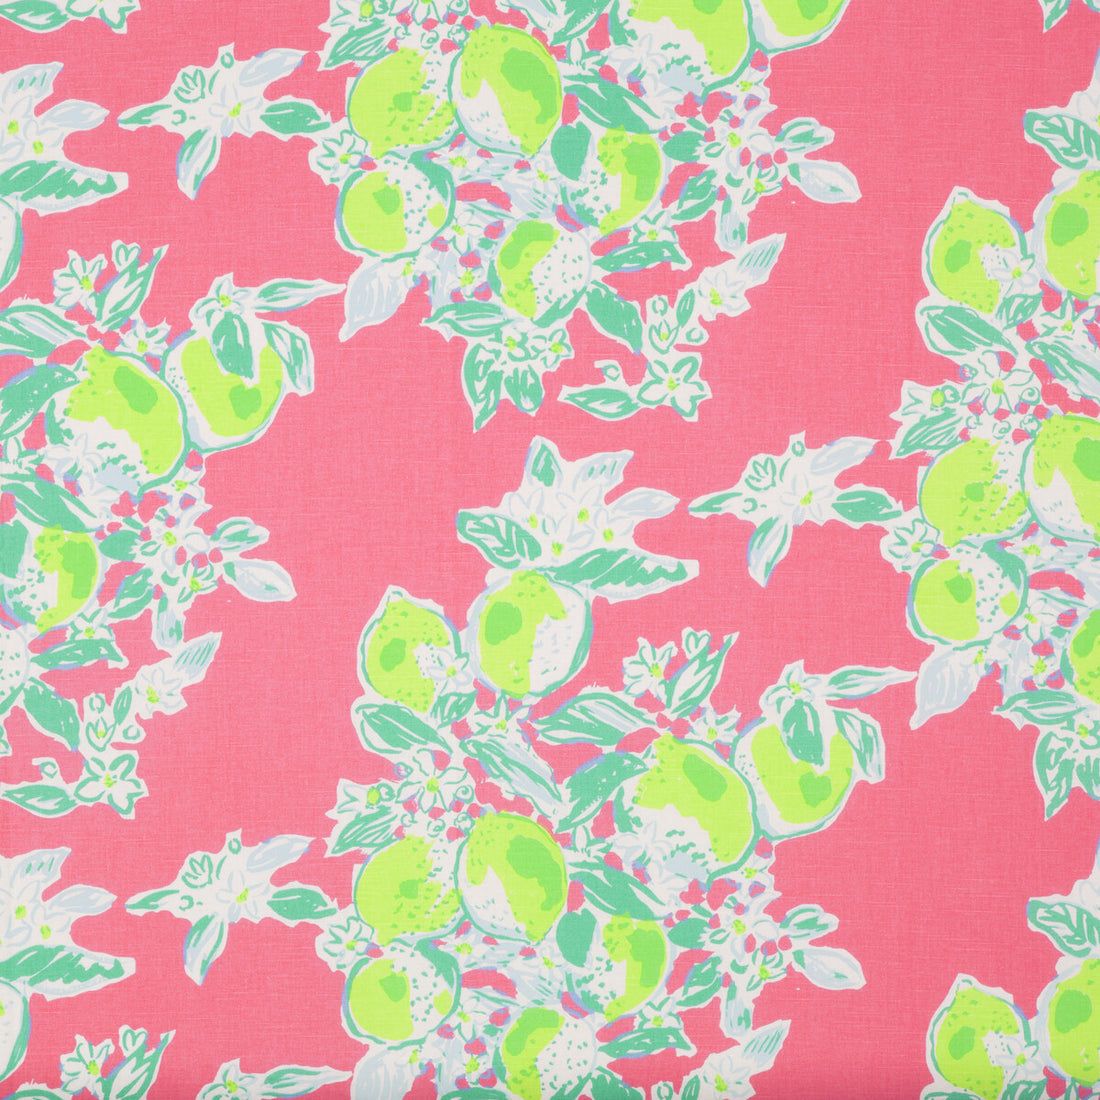 Pink Lemonade fabric in hotty pink color - pattern 2016113.77.0 - by Lee Jofa in the Lilly Pulitzer II collection